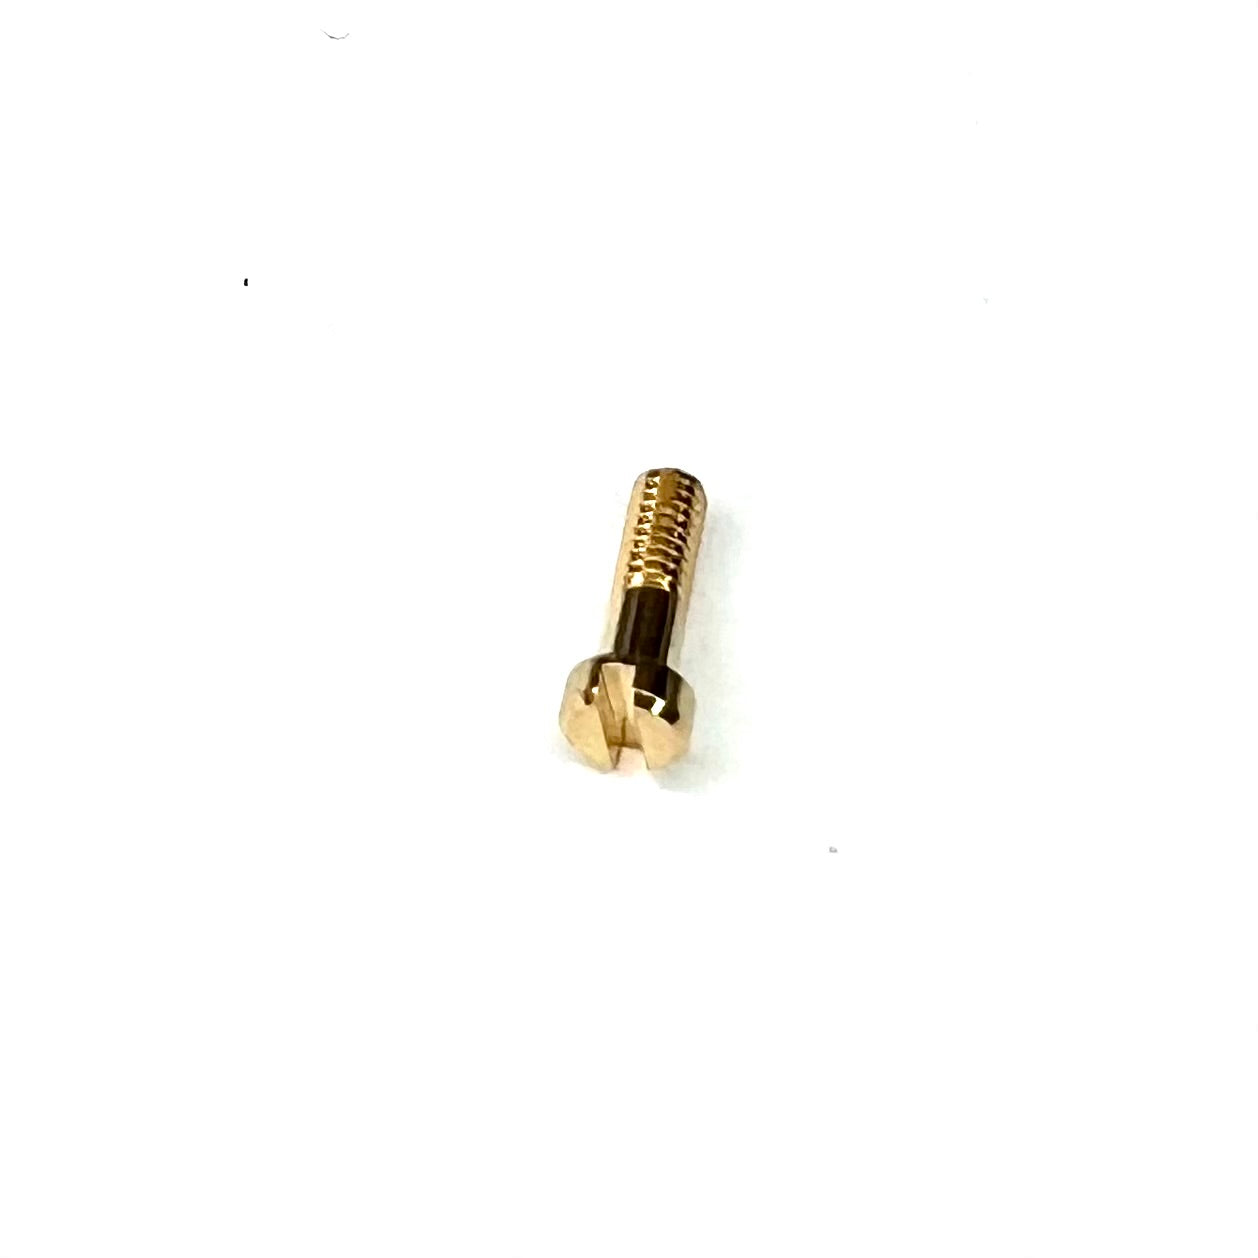 NEW Old Stock Authentic CARTIER PENDULETTE 8.1mm Gold Tone Screw Clock Part